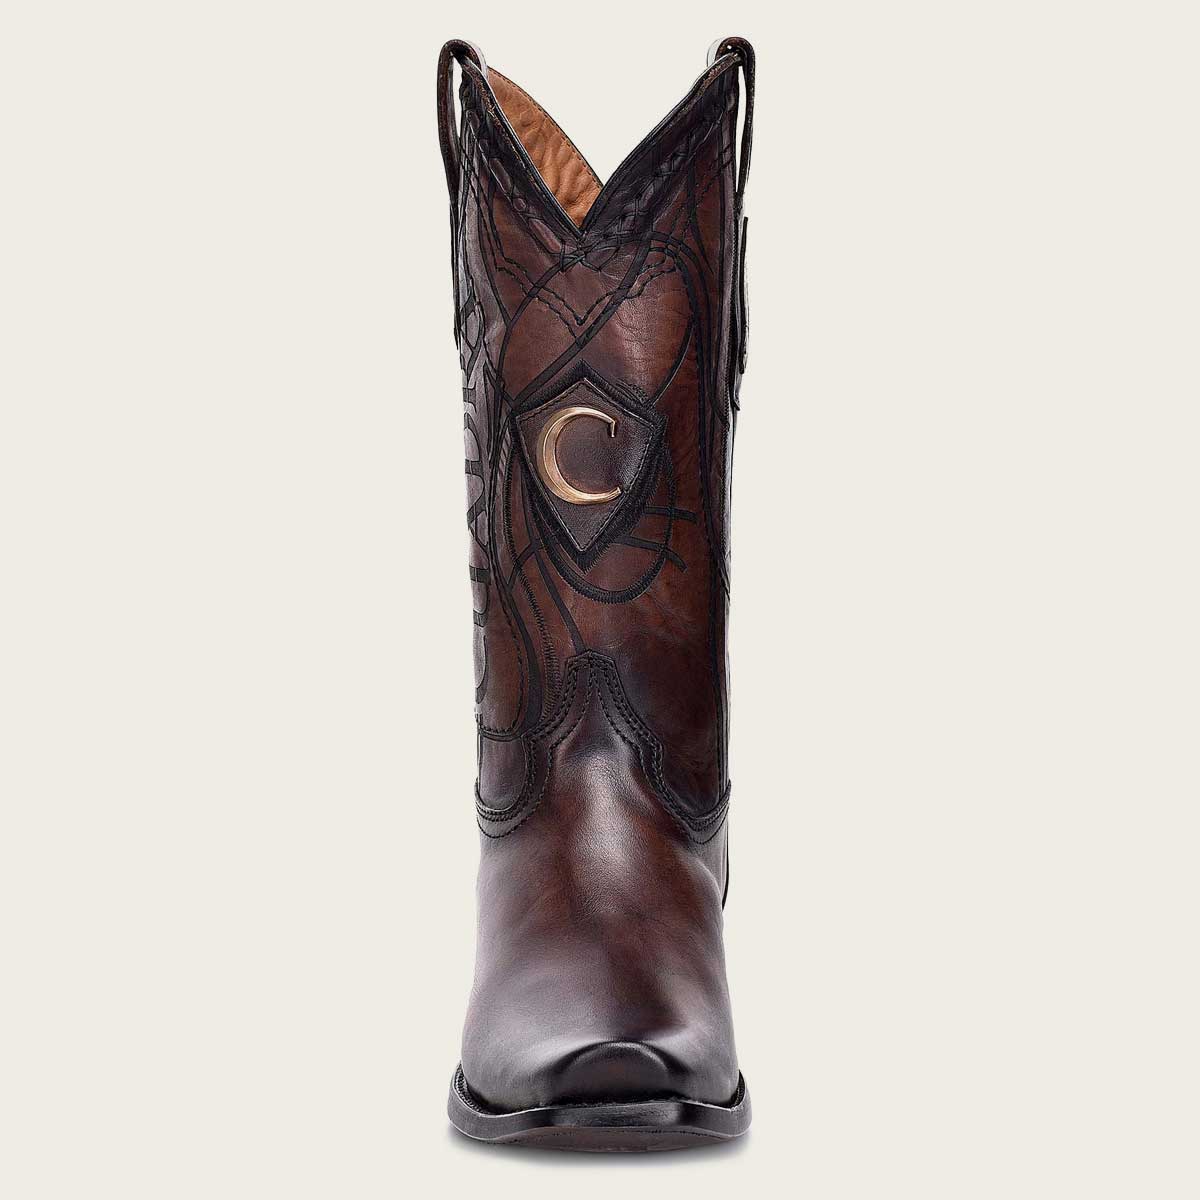 Don't miss the opportunity to own this exclusive and limited edition boot that promises to make a lasting impression.